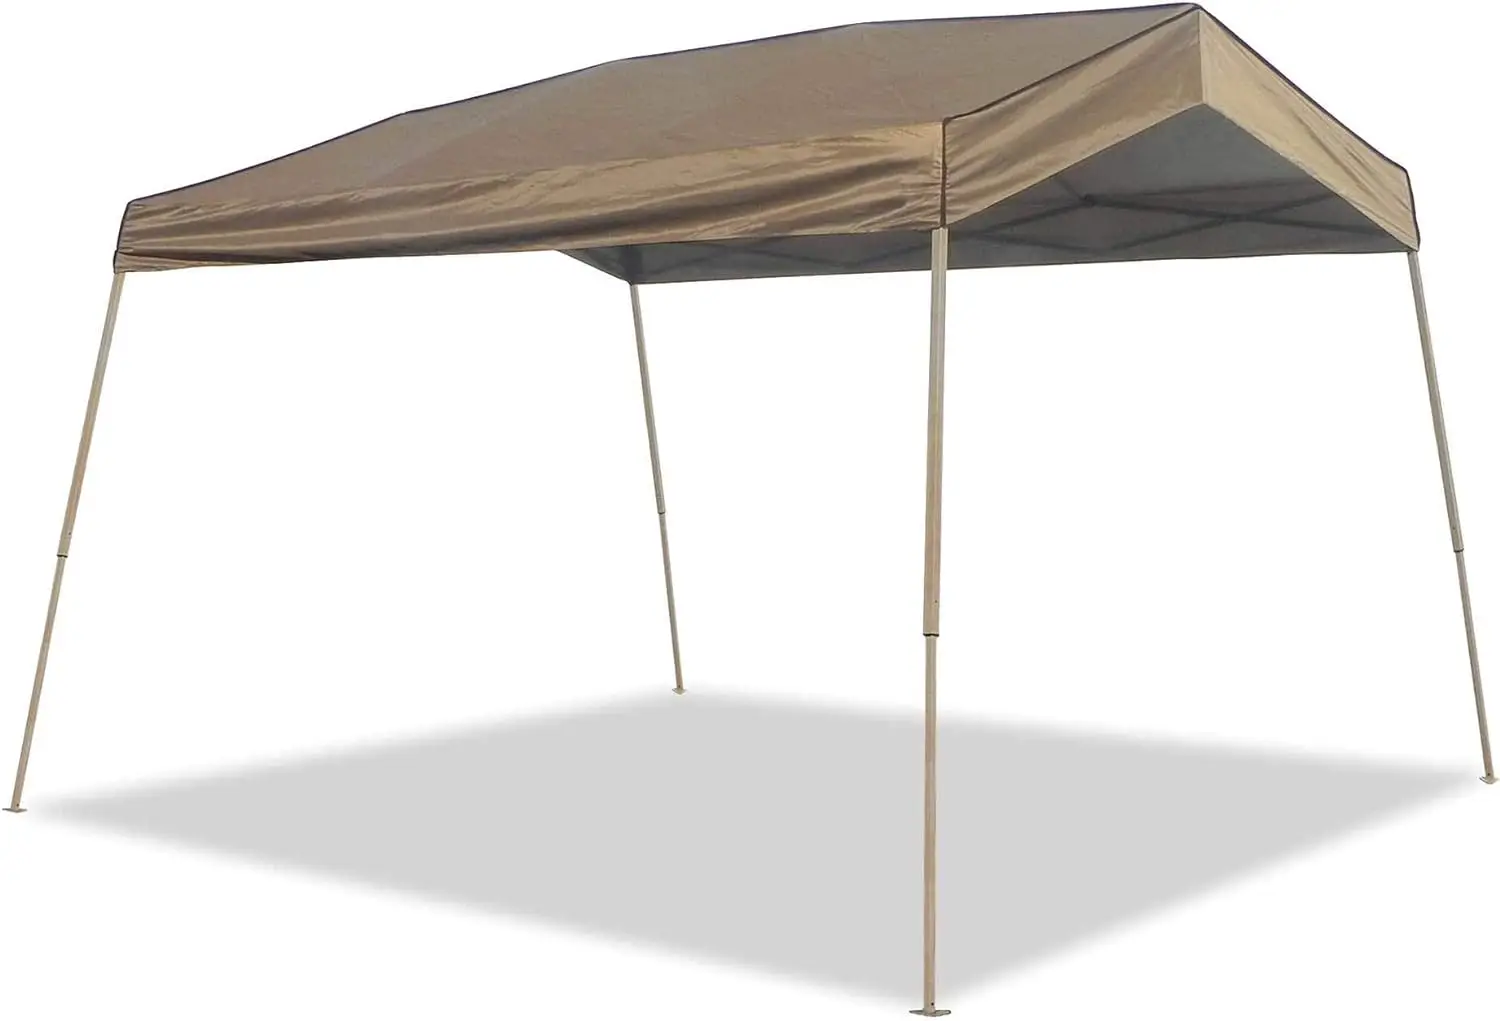 

x 14 Foot Panorama Instant Pop Up Canopy Tent Outdoor Shelter Tent with Reliable Stakes, Steel Frame, and Rolling Bag, Tan Japan